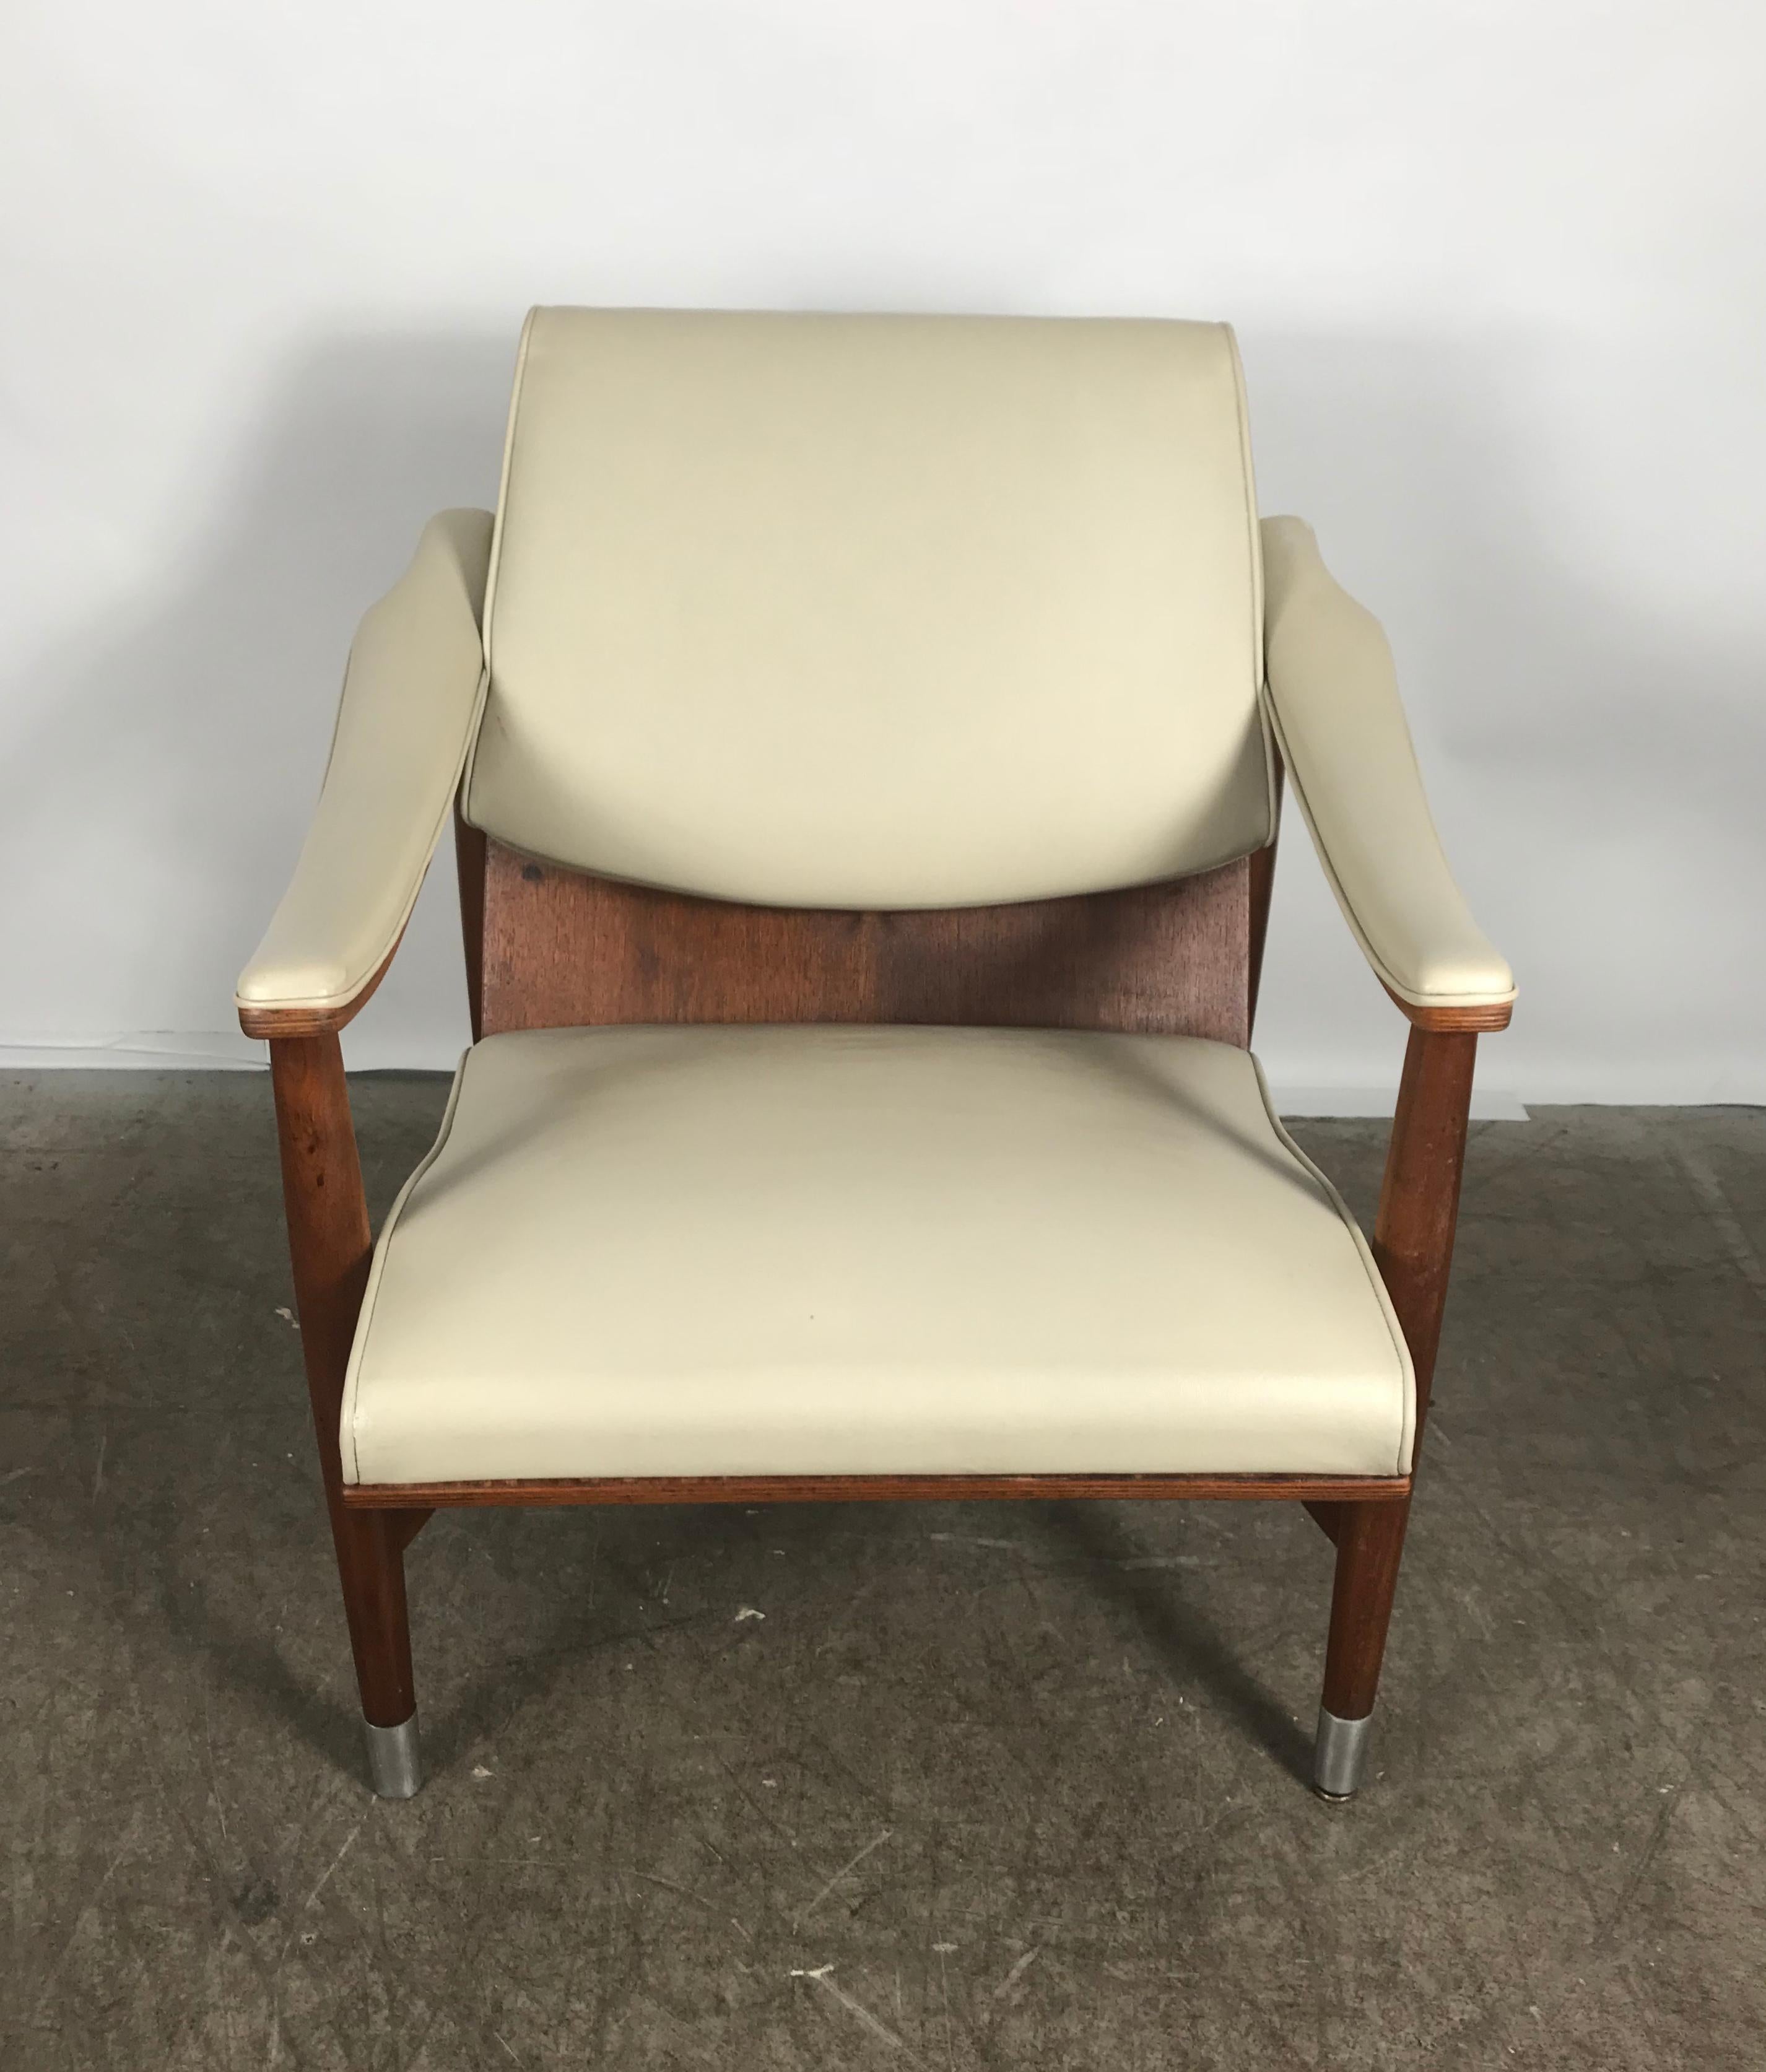 American Classic Mid-Century Modern Plywood Scoop Lounge Chair by Thonet